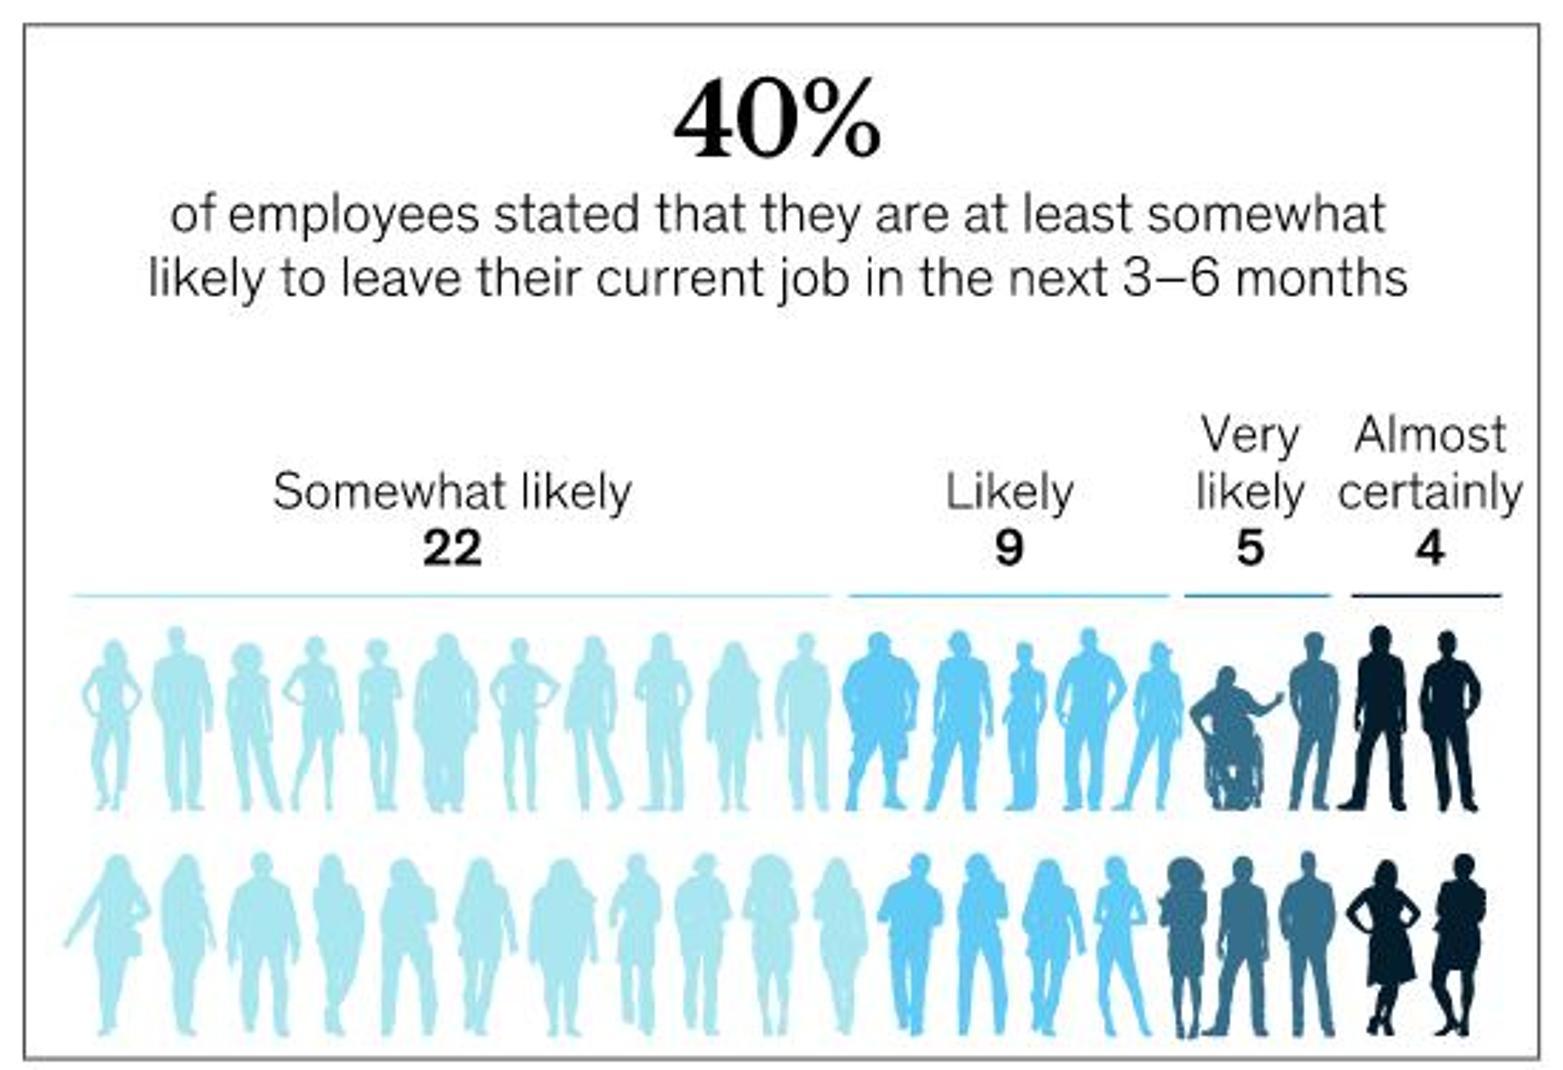 Forty Percent of employees stated that they are at least as likely to leave their current job in the next three to six months, twentytwo percent said somewhat likely, nine percent said likely, five percent said very likely and four percent said almost certainly. 